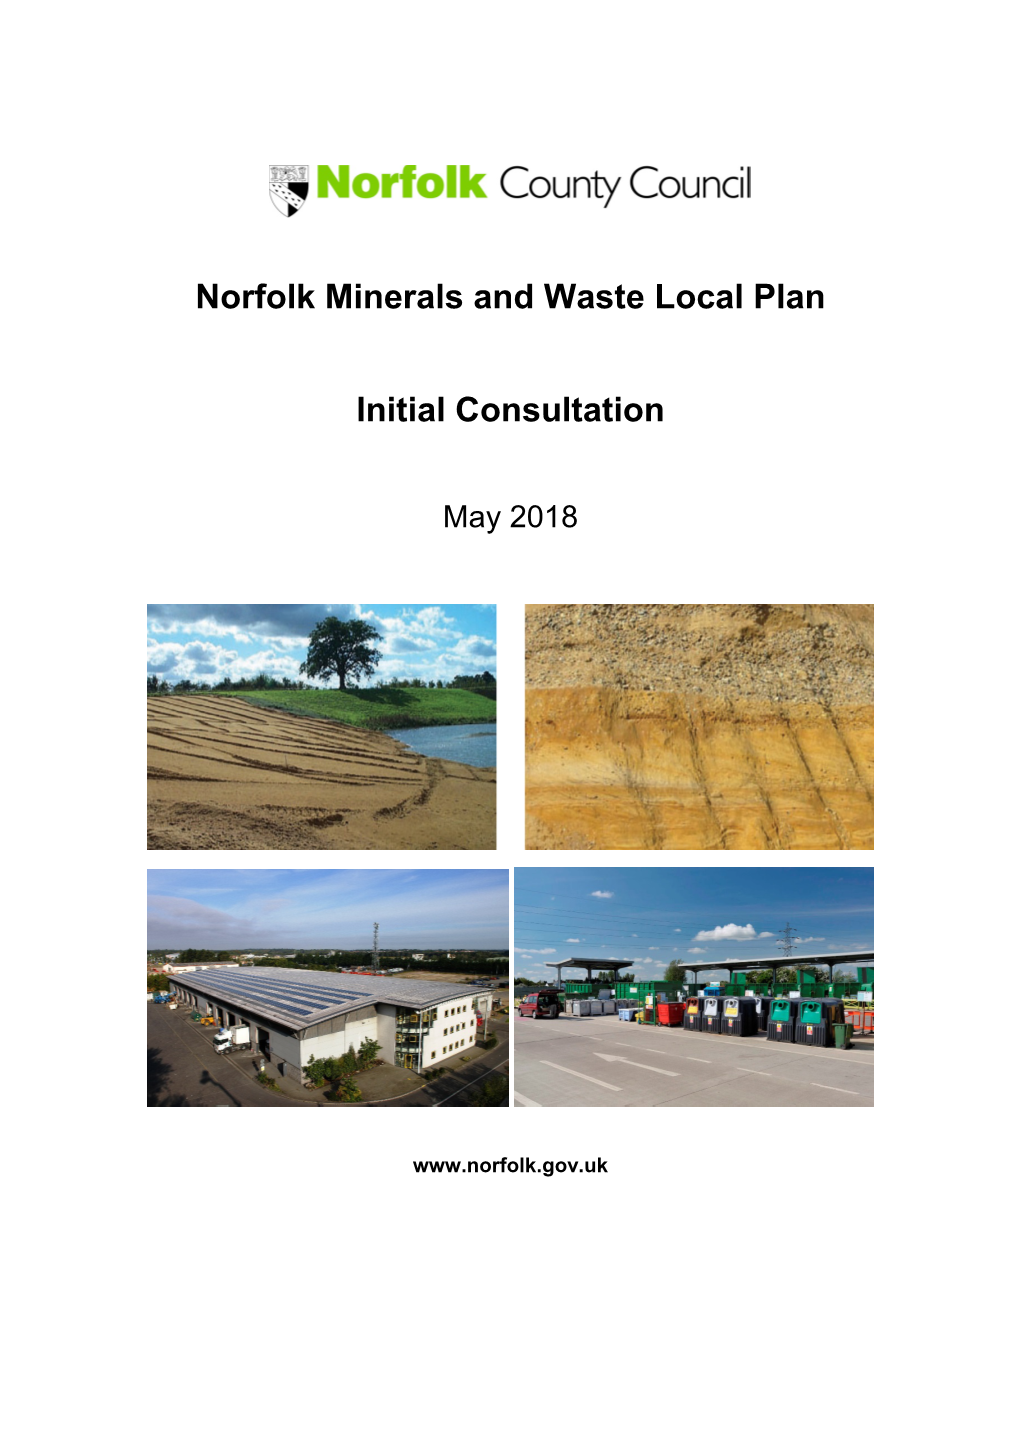 Norfolk Minerals and Waste Local Plan Initial Consultation